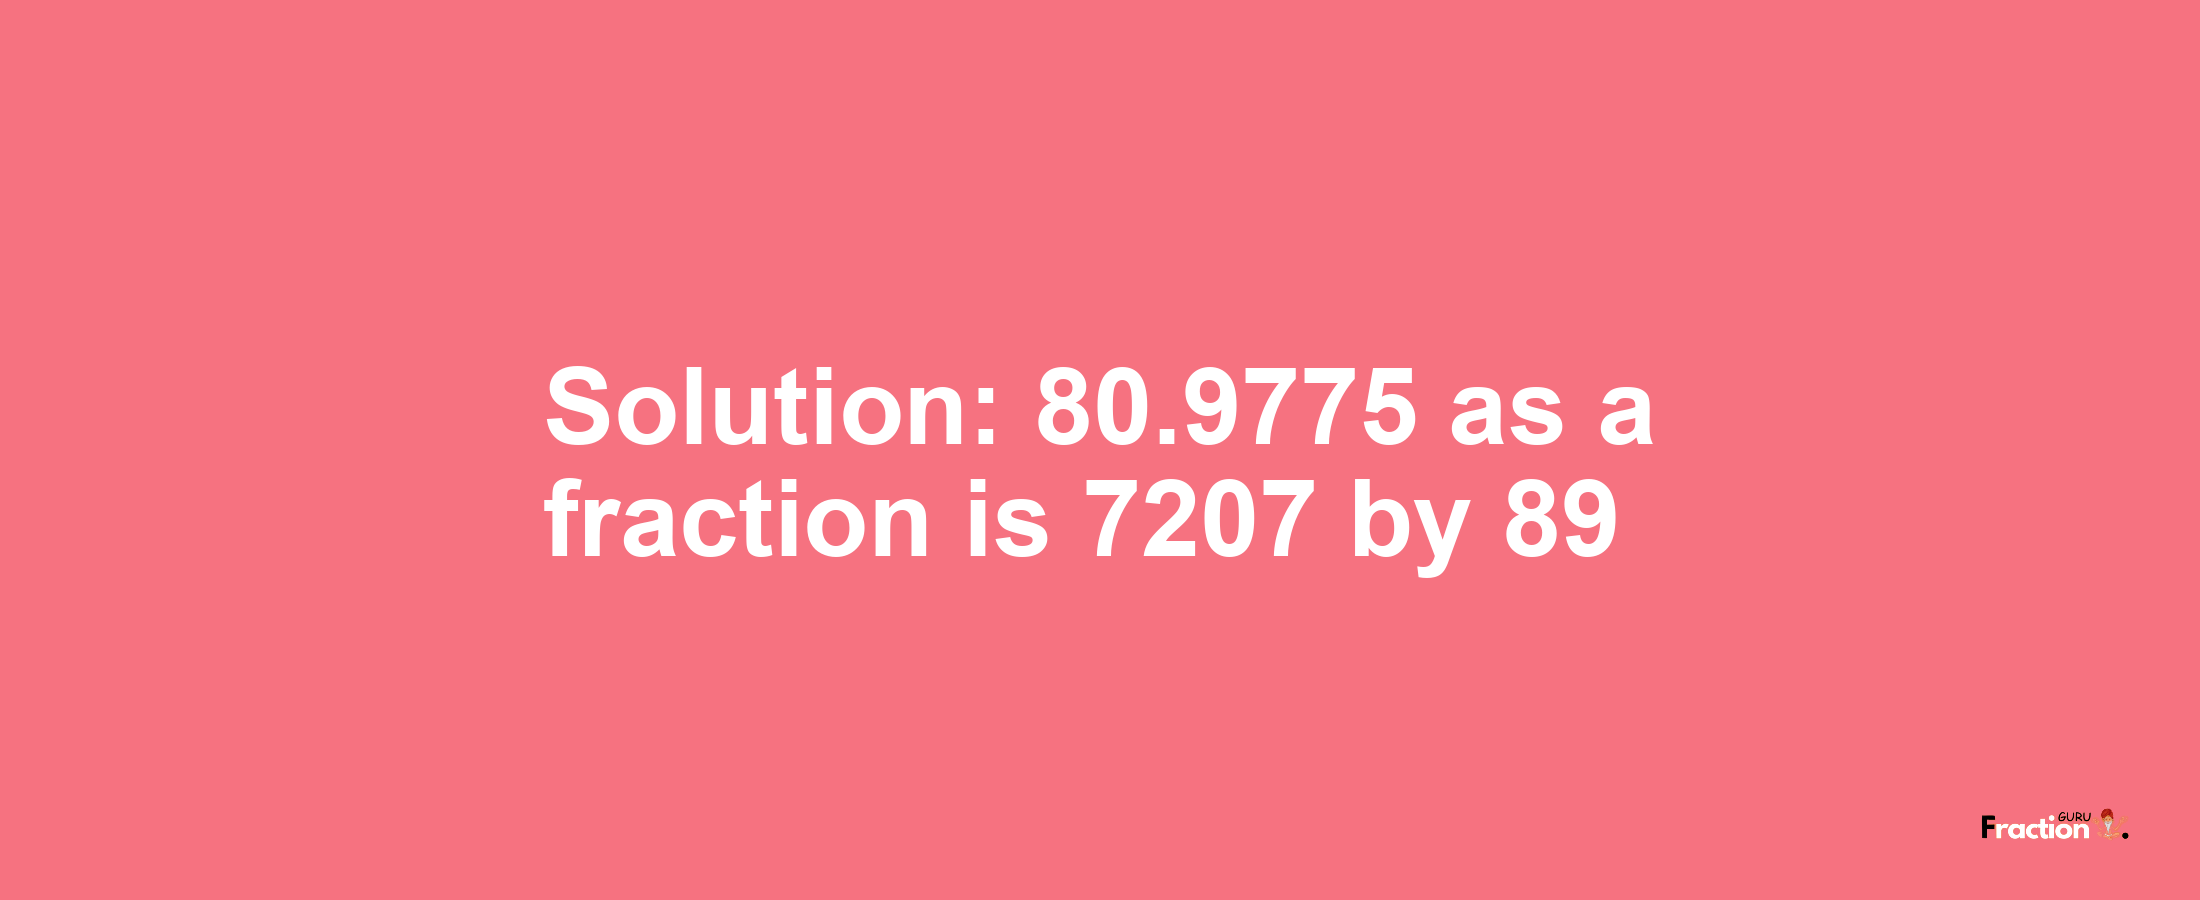 Solution:80.9775 as a fraction is 7207/89